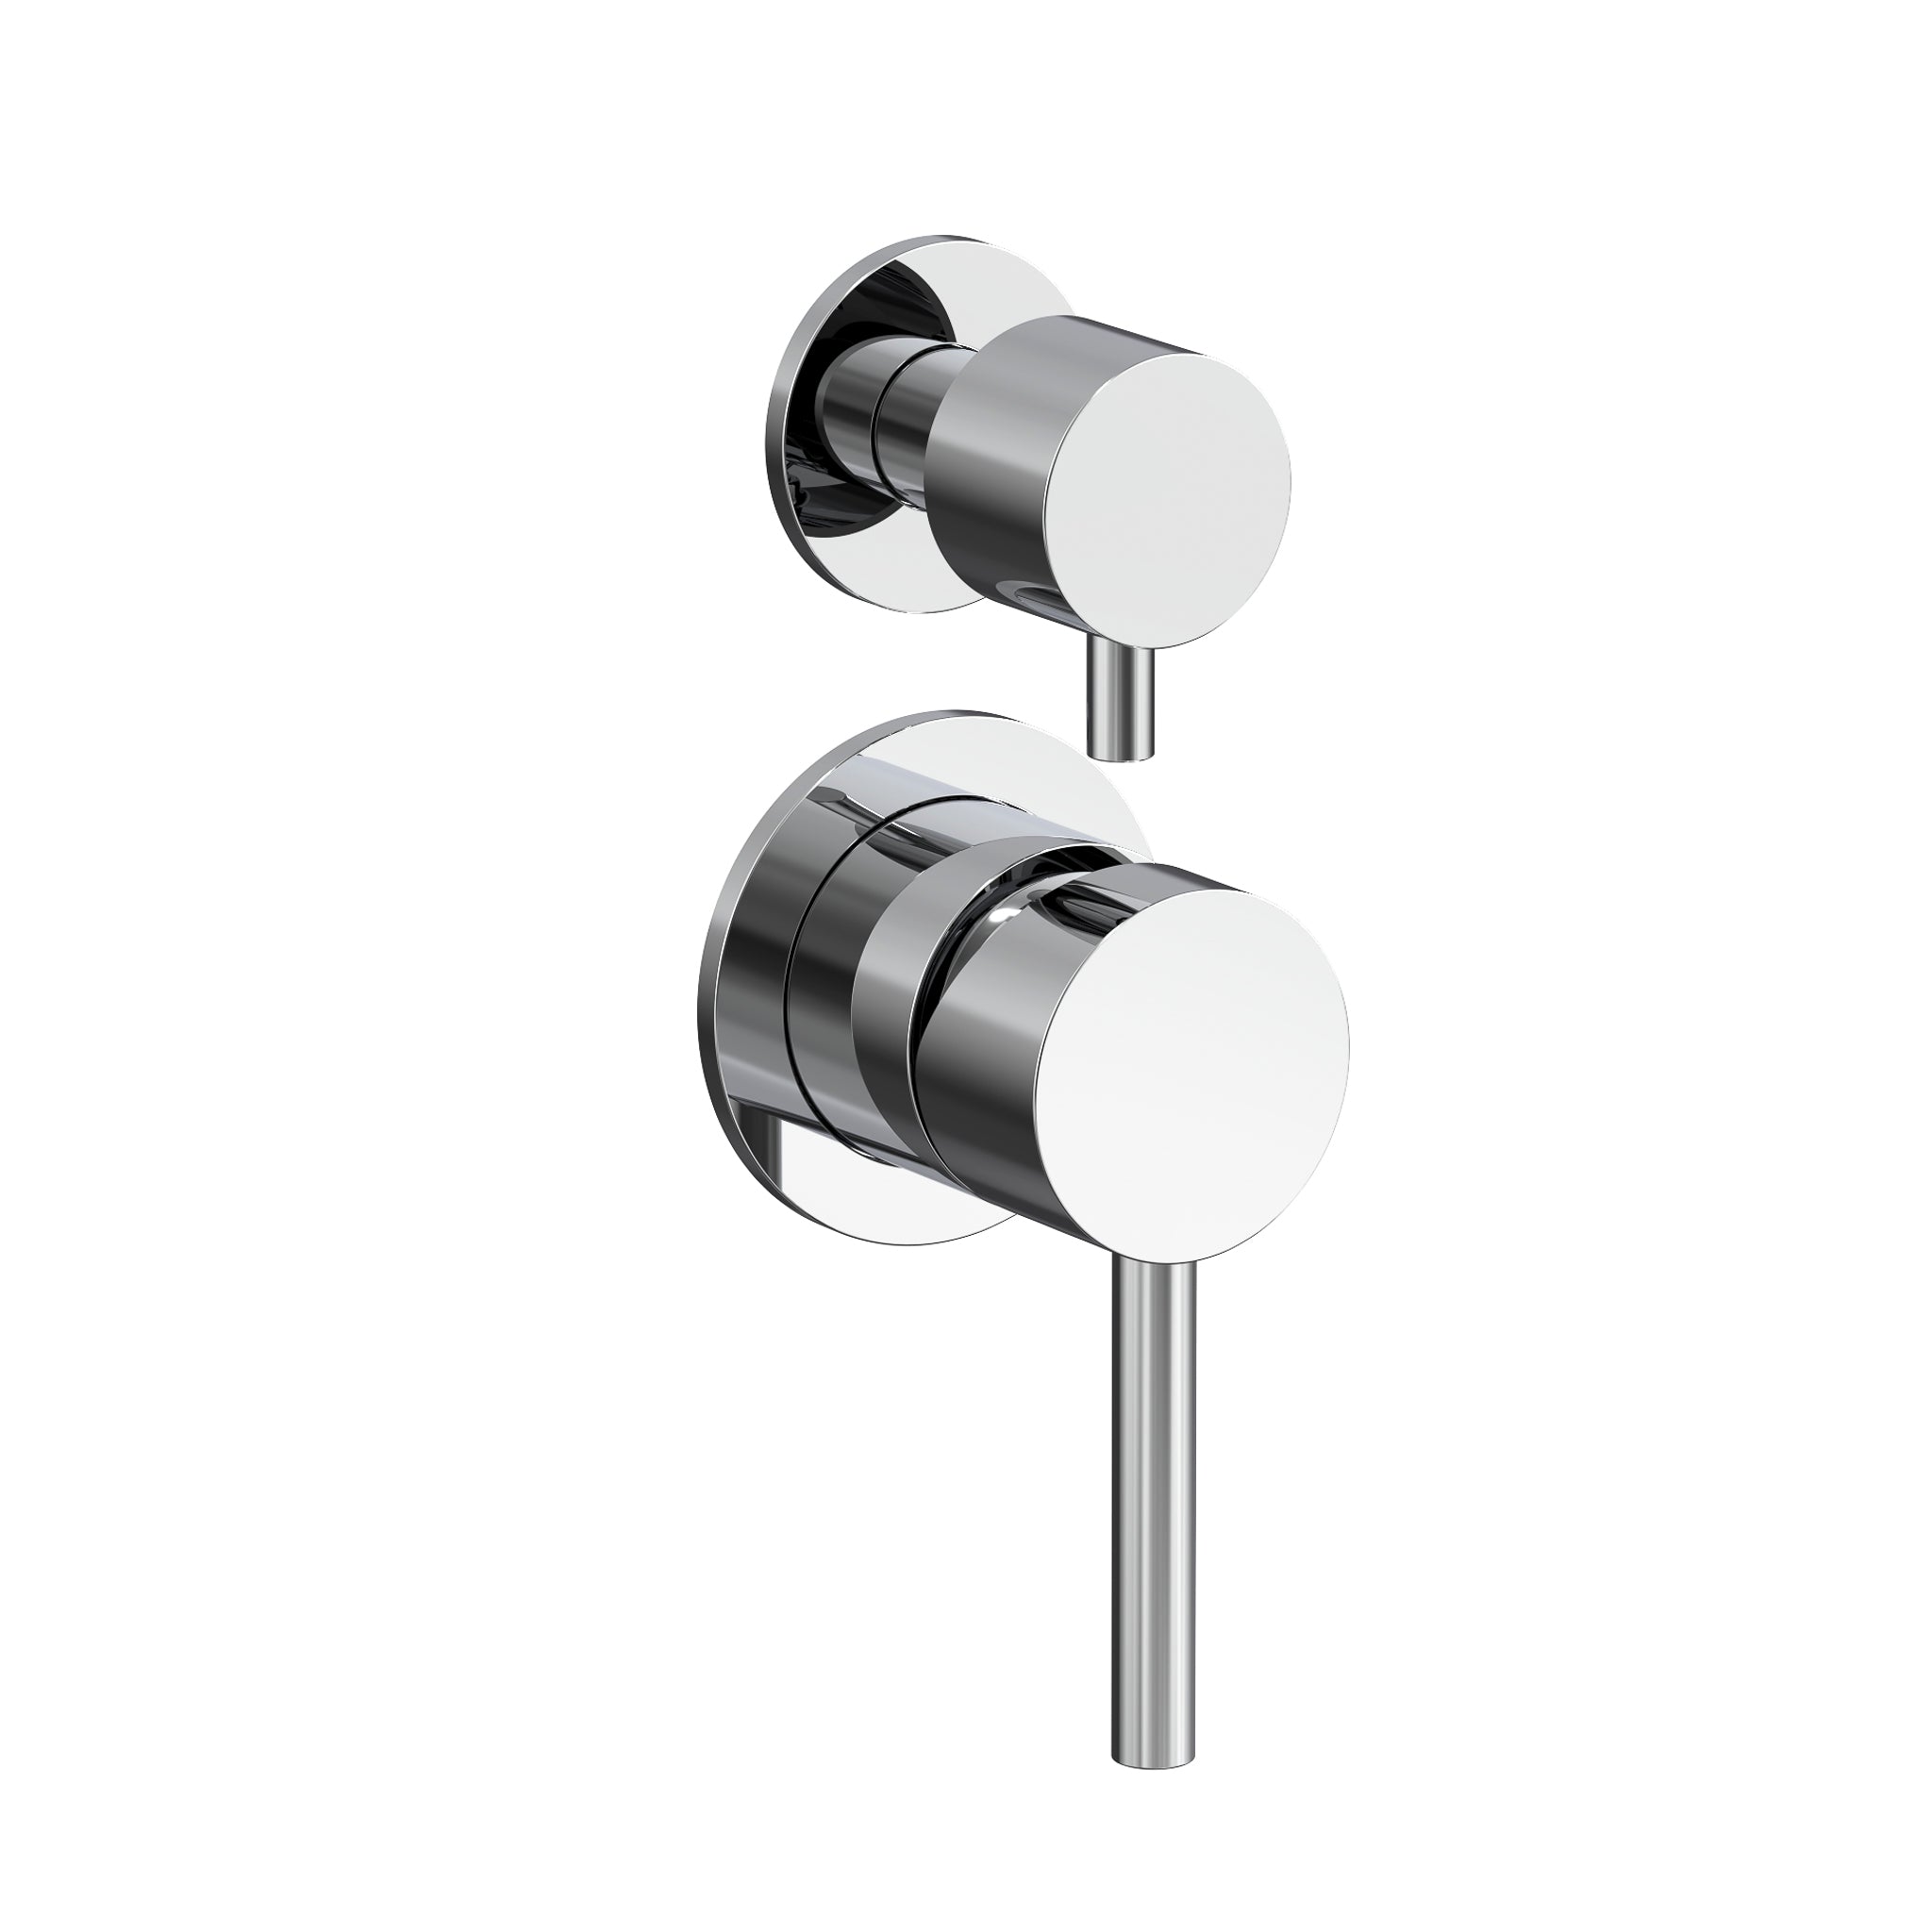 Profile III Shower/ Bath Wall Mixer with Diverter, Polished Chrome